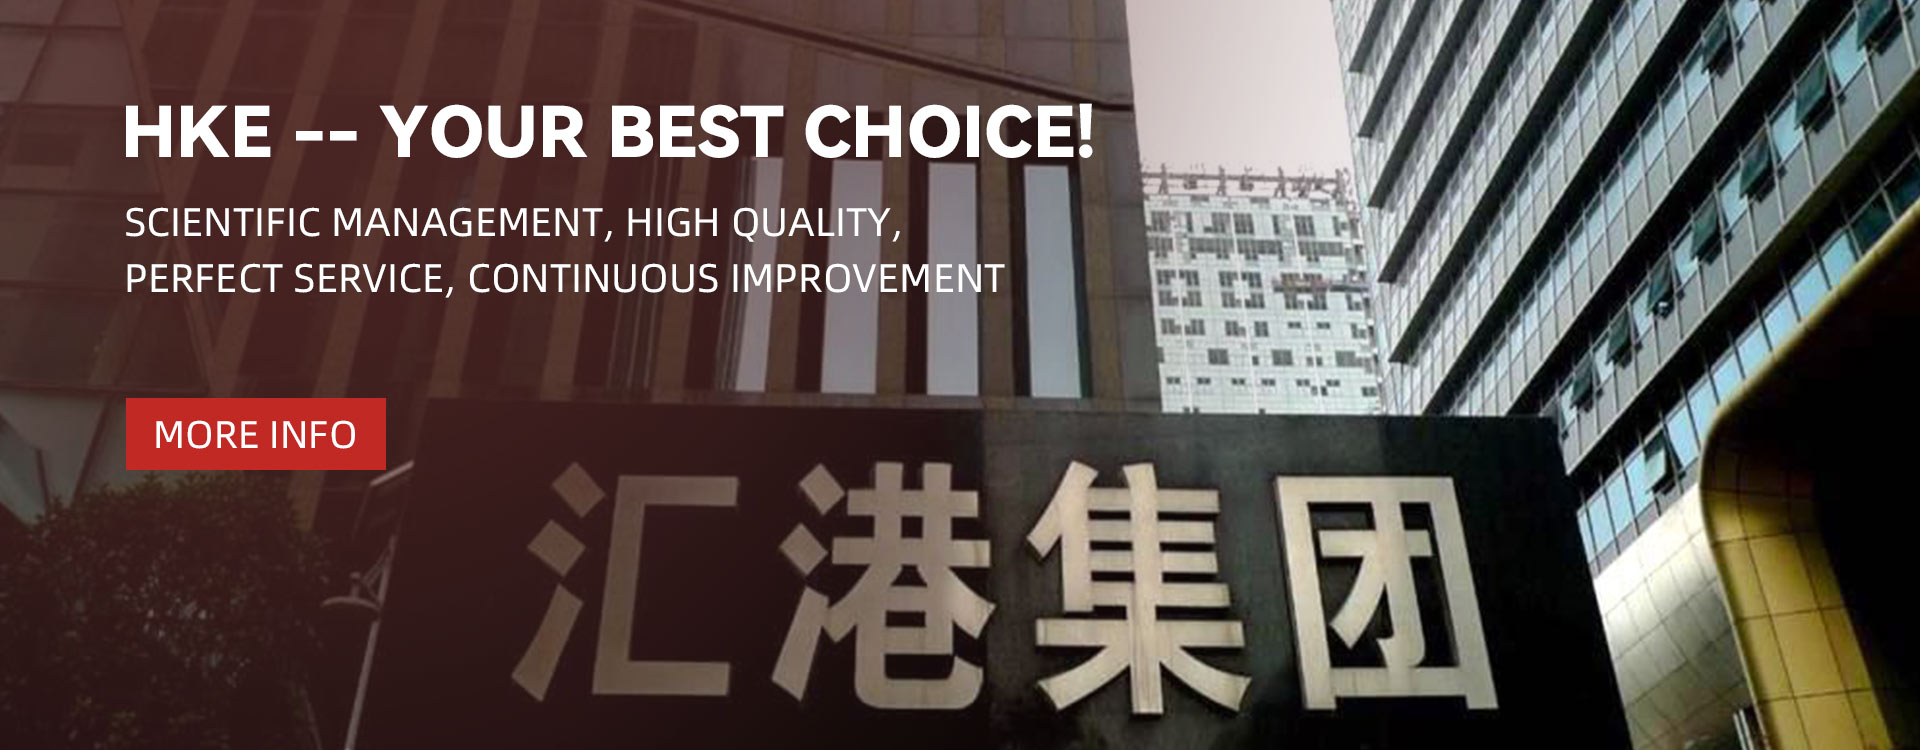 HKE -- your best choice!